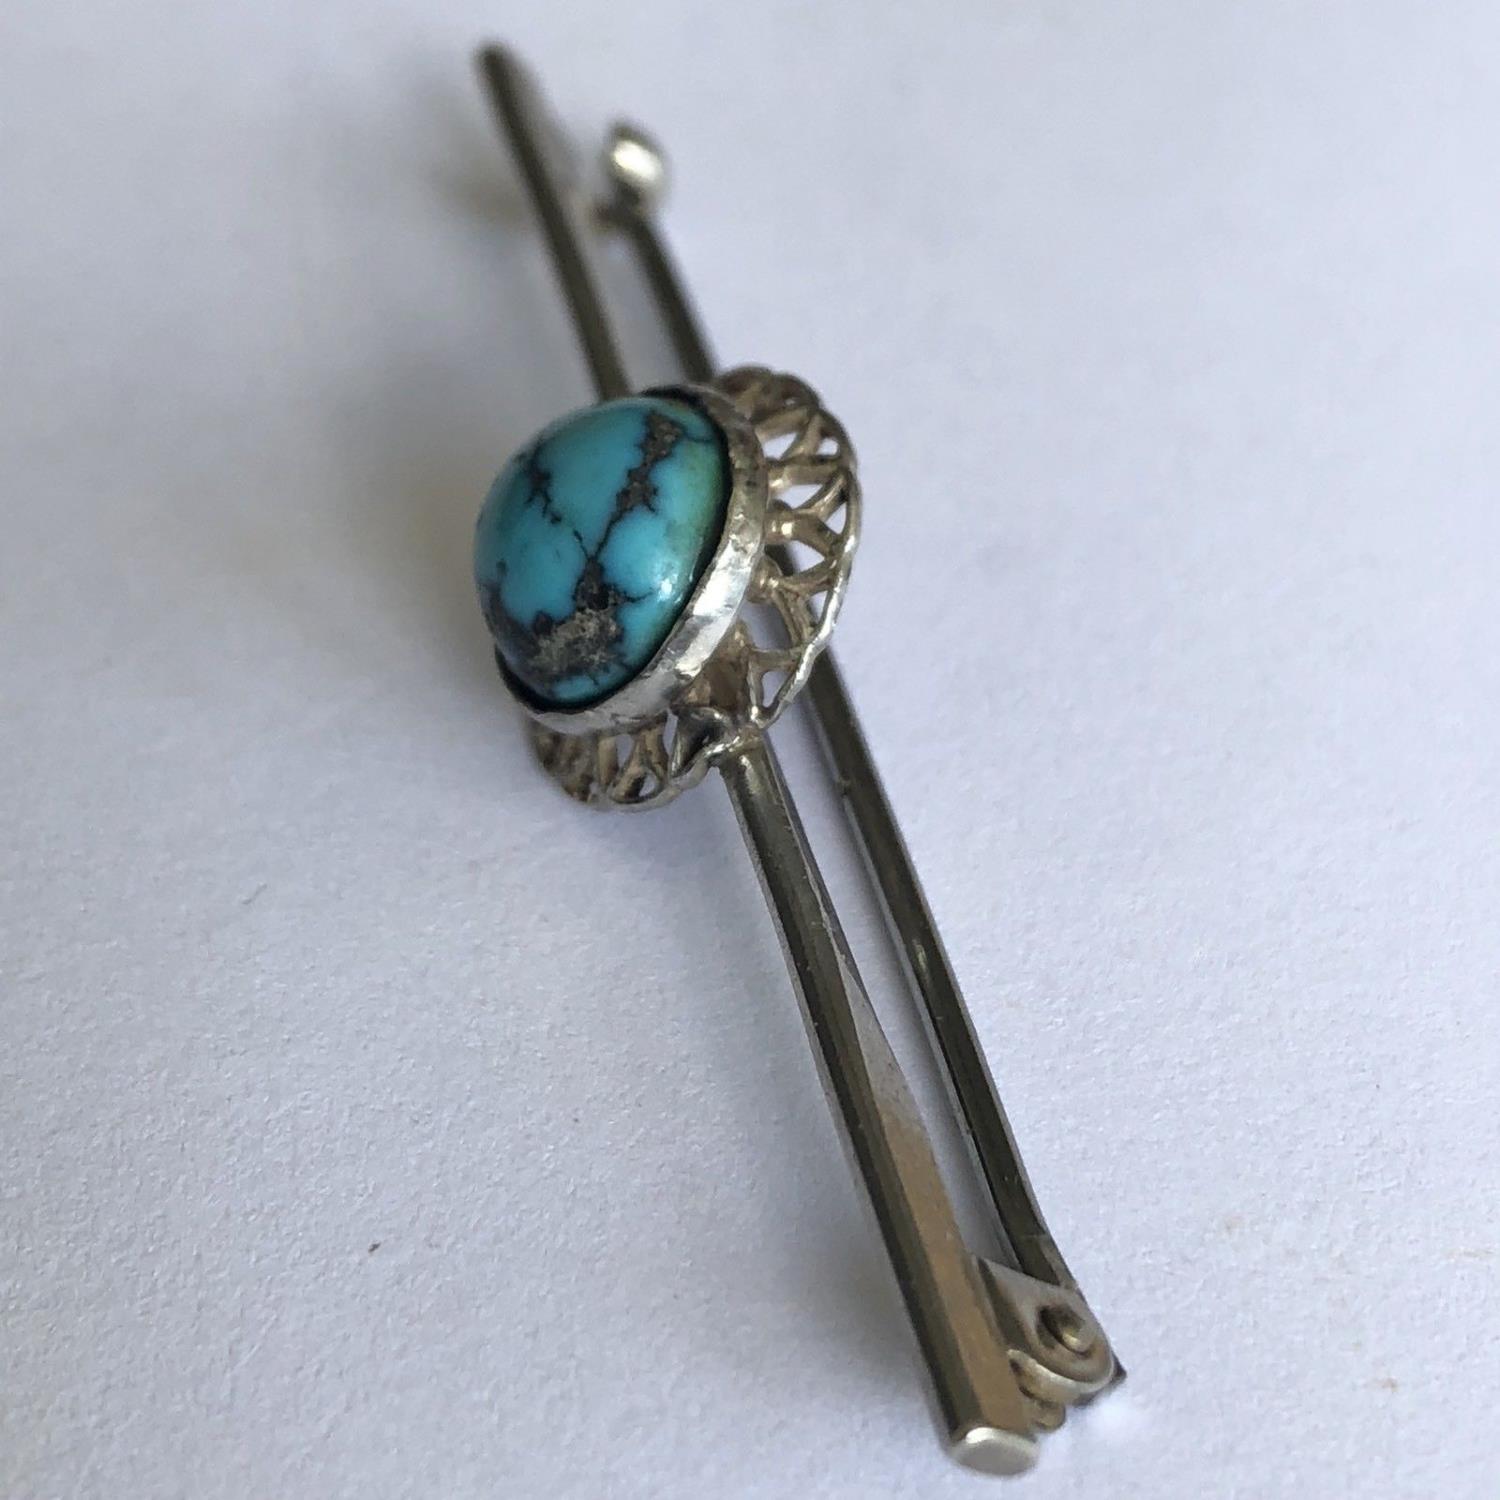 An antique Sterling Silver Bar Brooch with central Turquoise Stone - Image 2 of 4